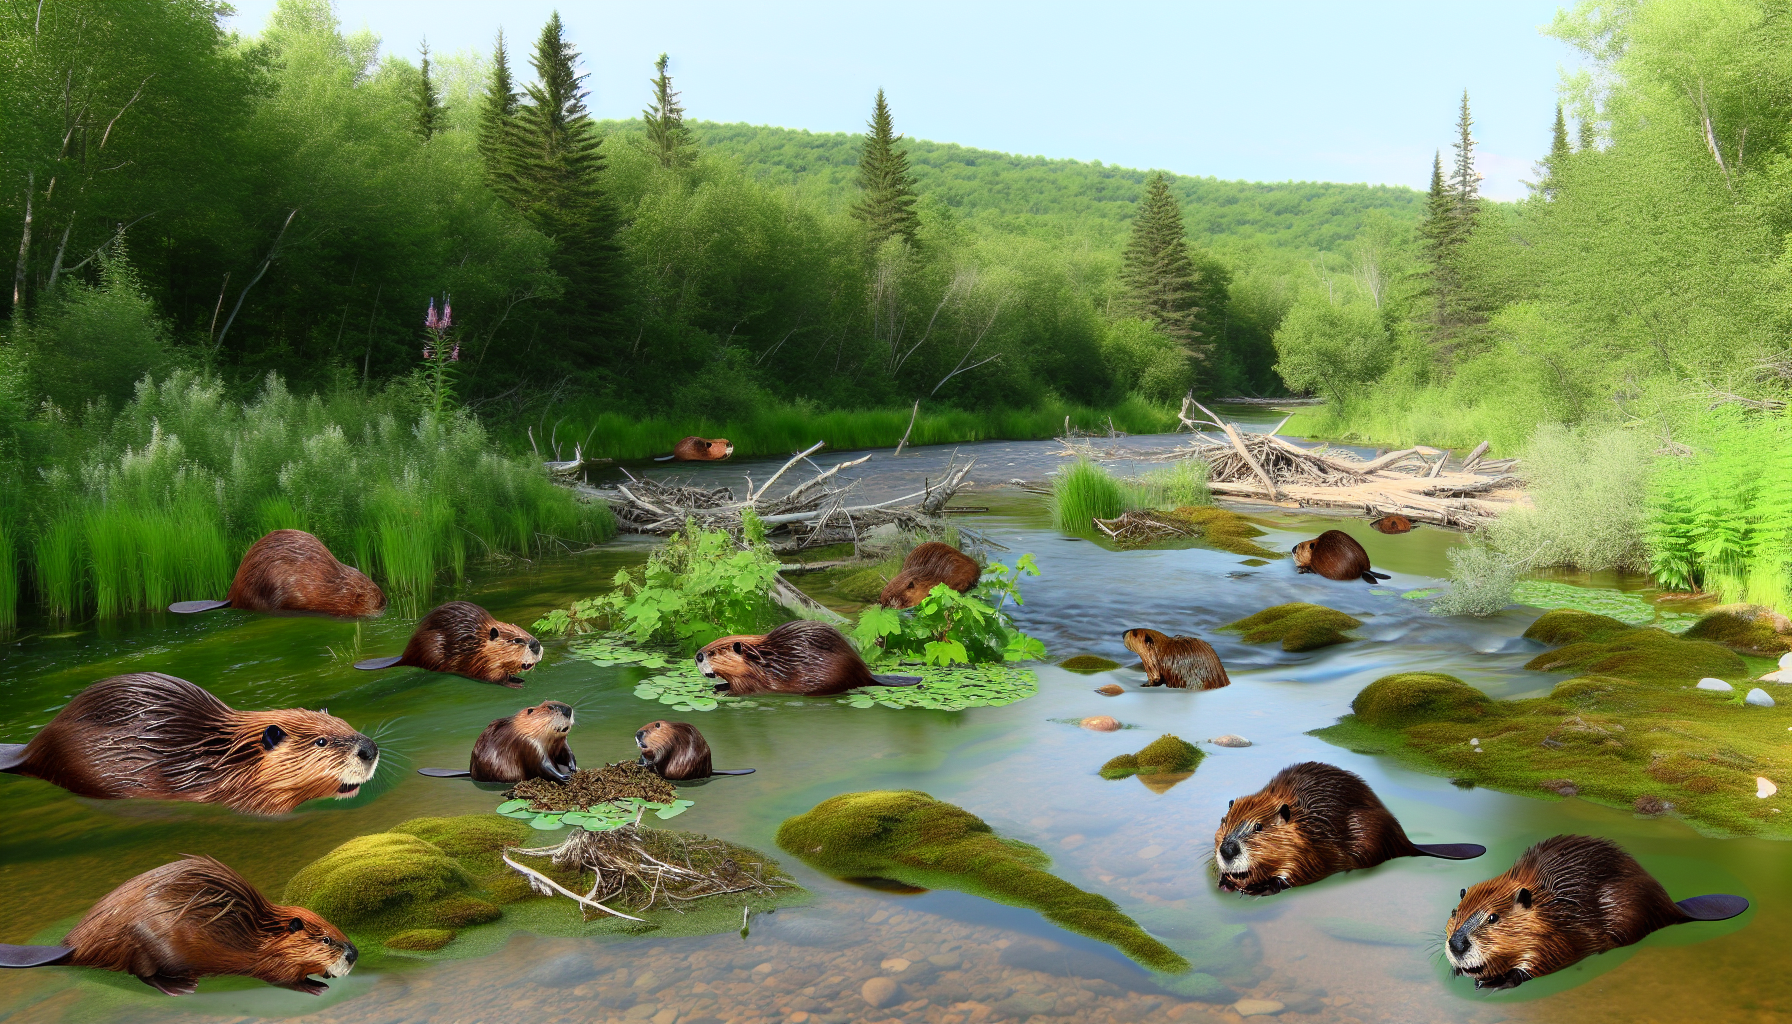 Revival of beavers bolsters French river ecosystems: a tale of resilience and harmony